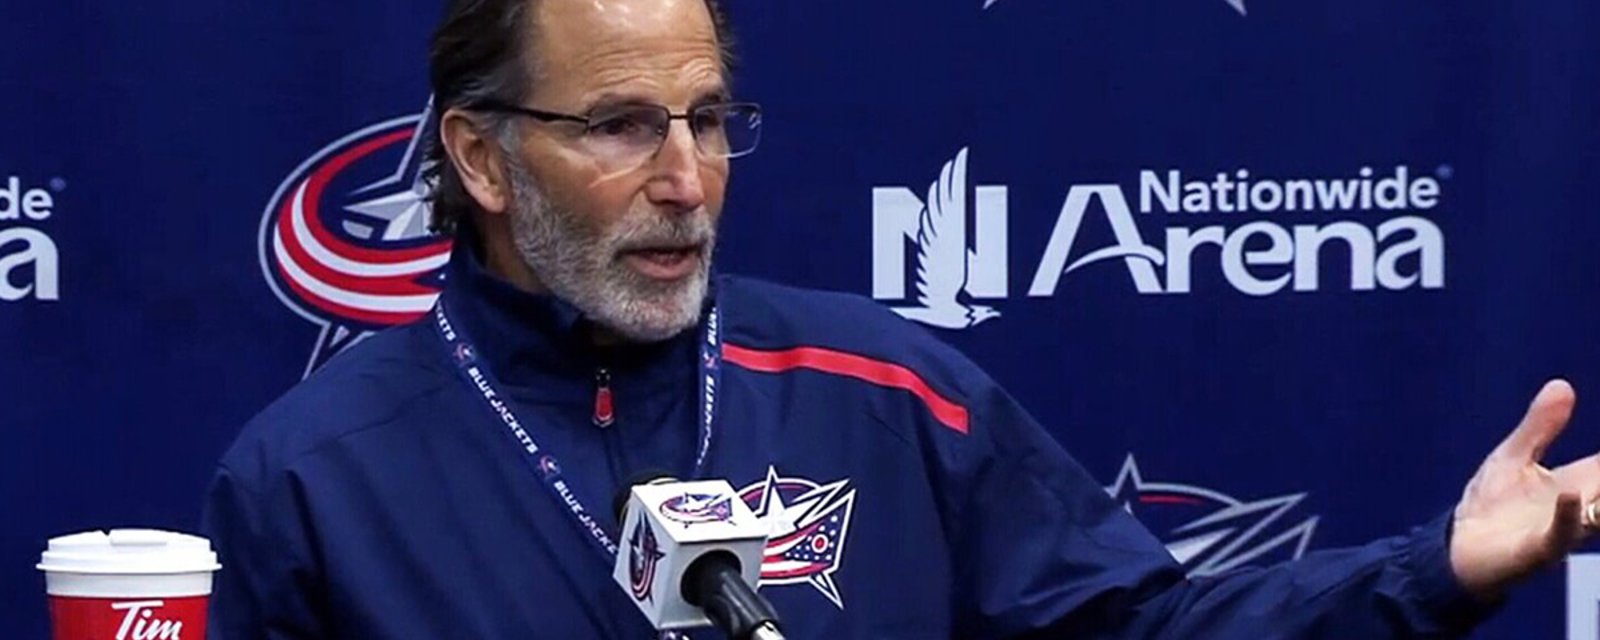 Tortorella gets testy with reporter who presses him on Bobrovsky’s team imposed suspension